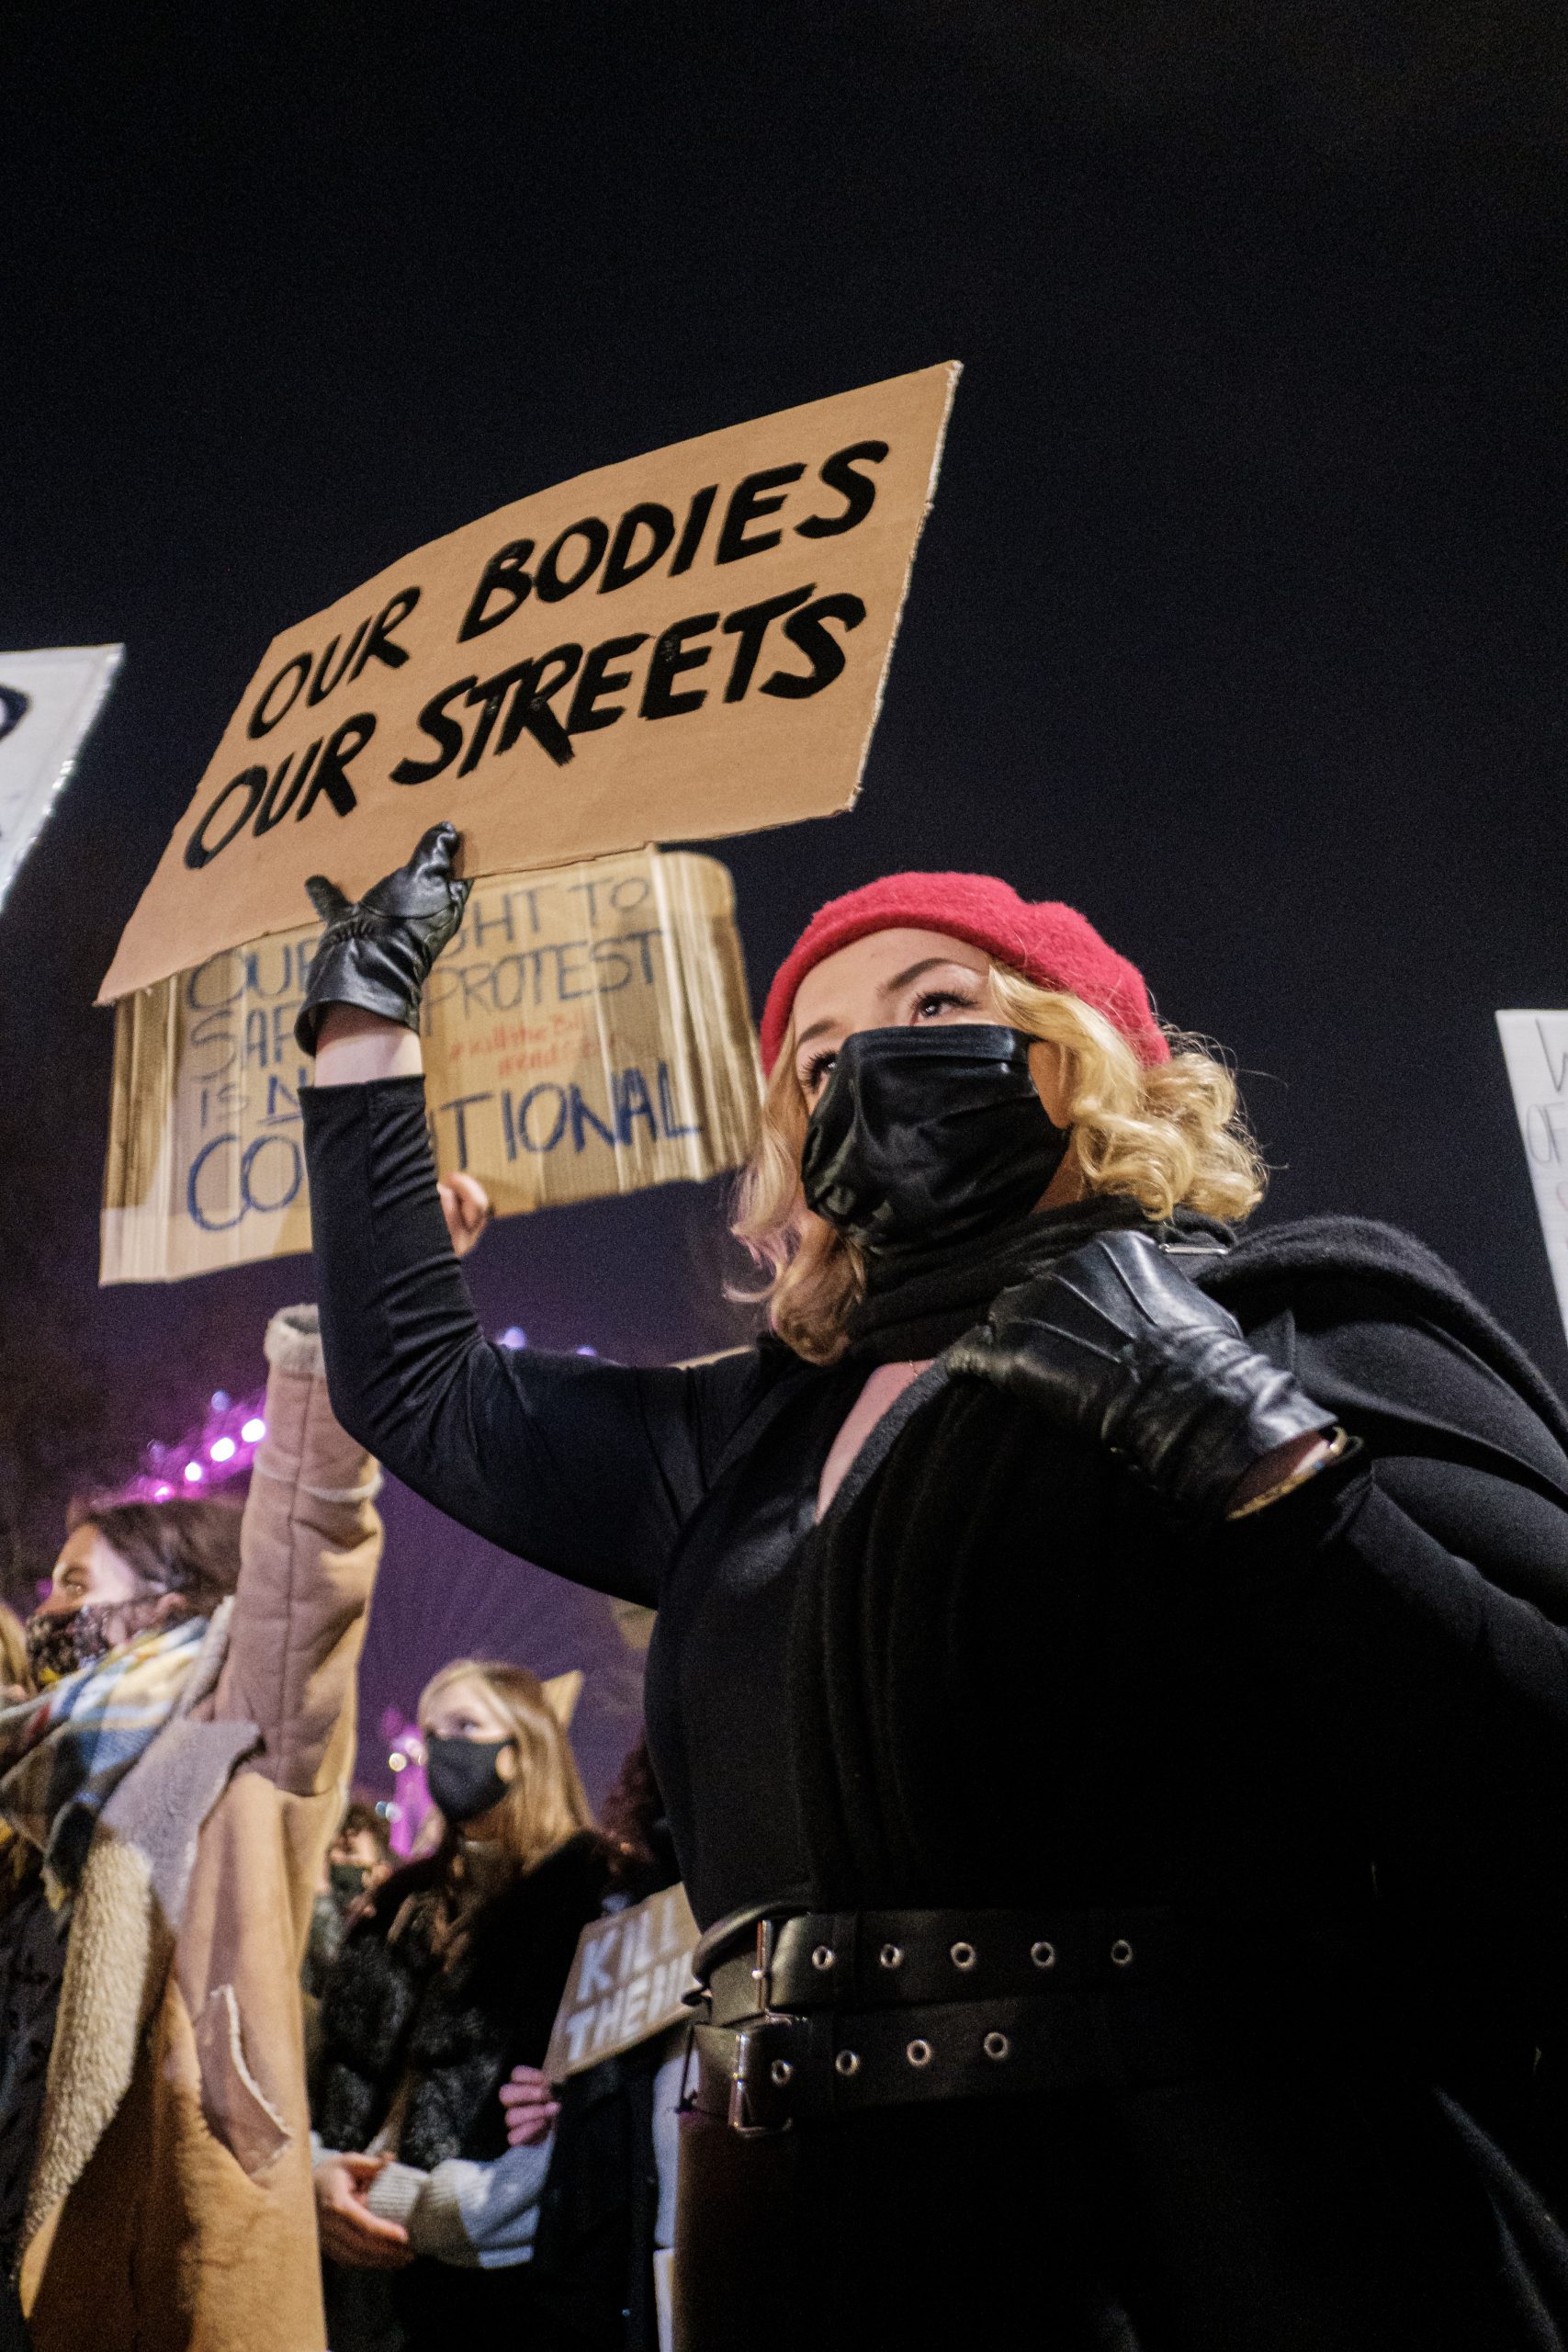 A protester at a vigil holds a sign that reads "our bodies our streets" in black capital letters